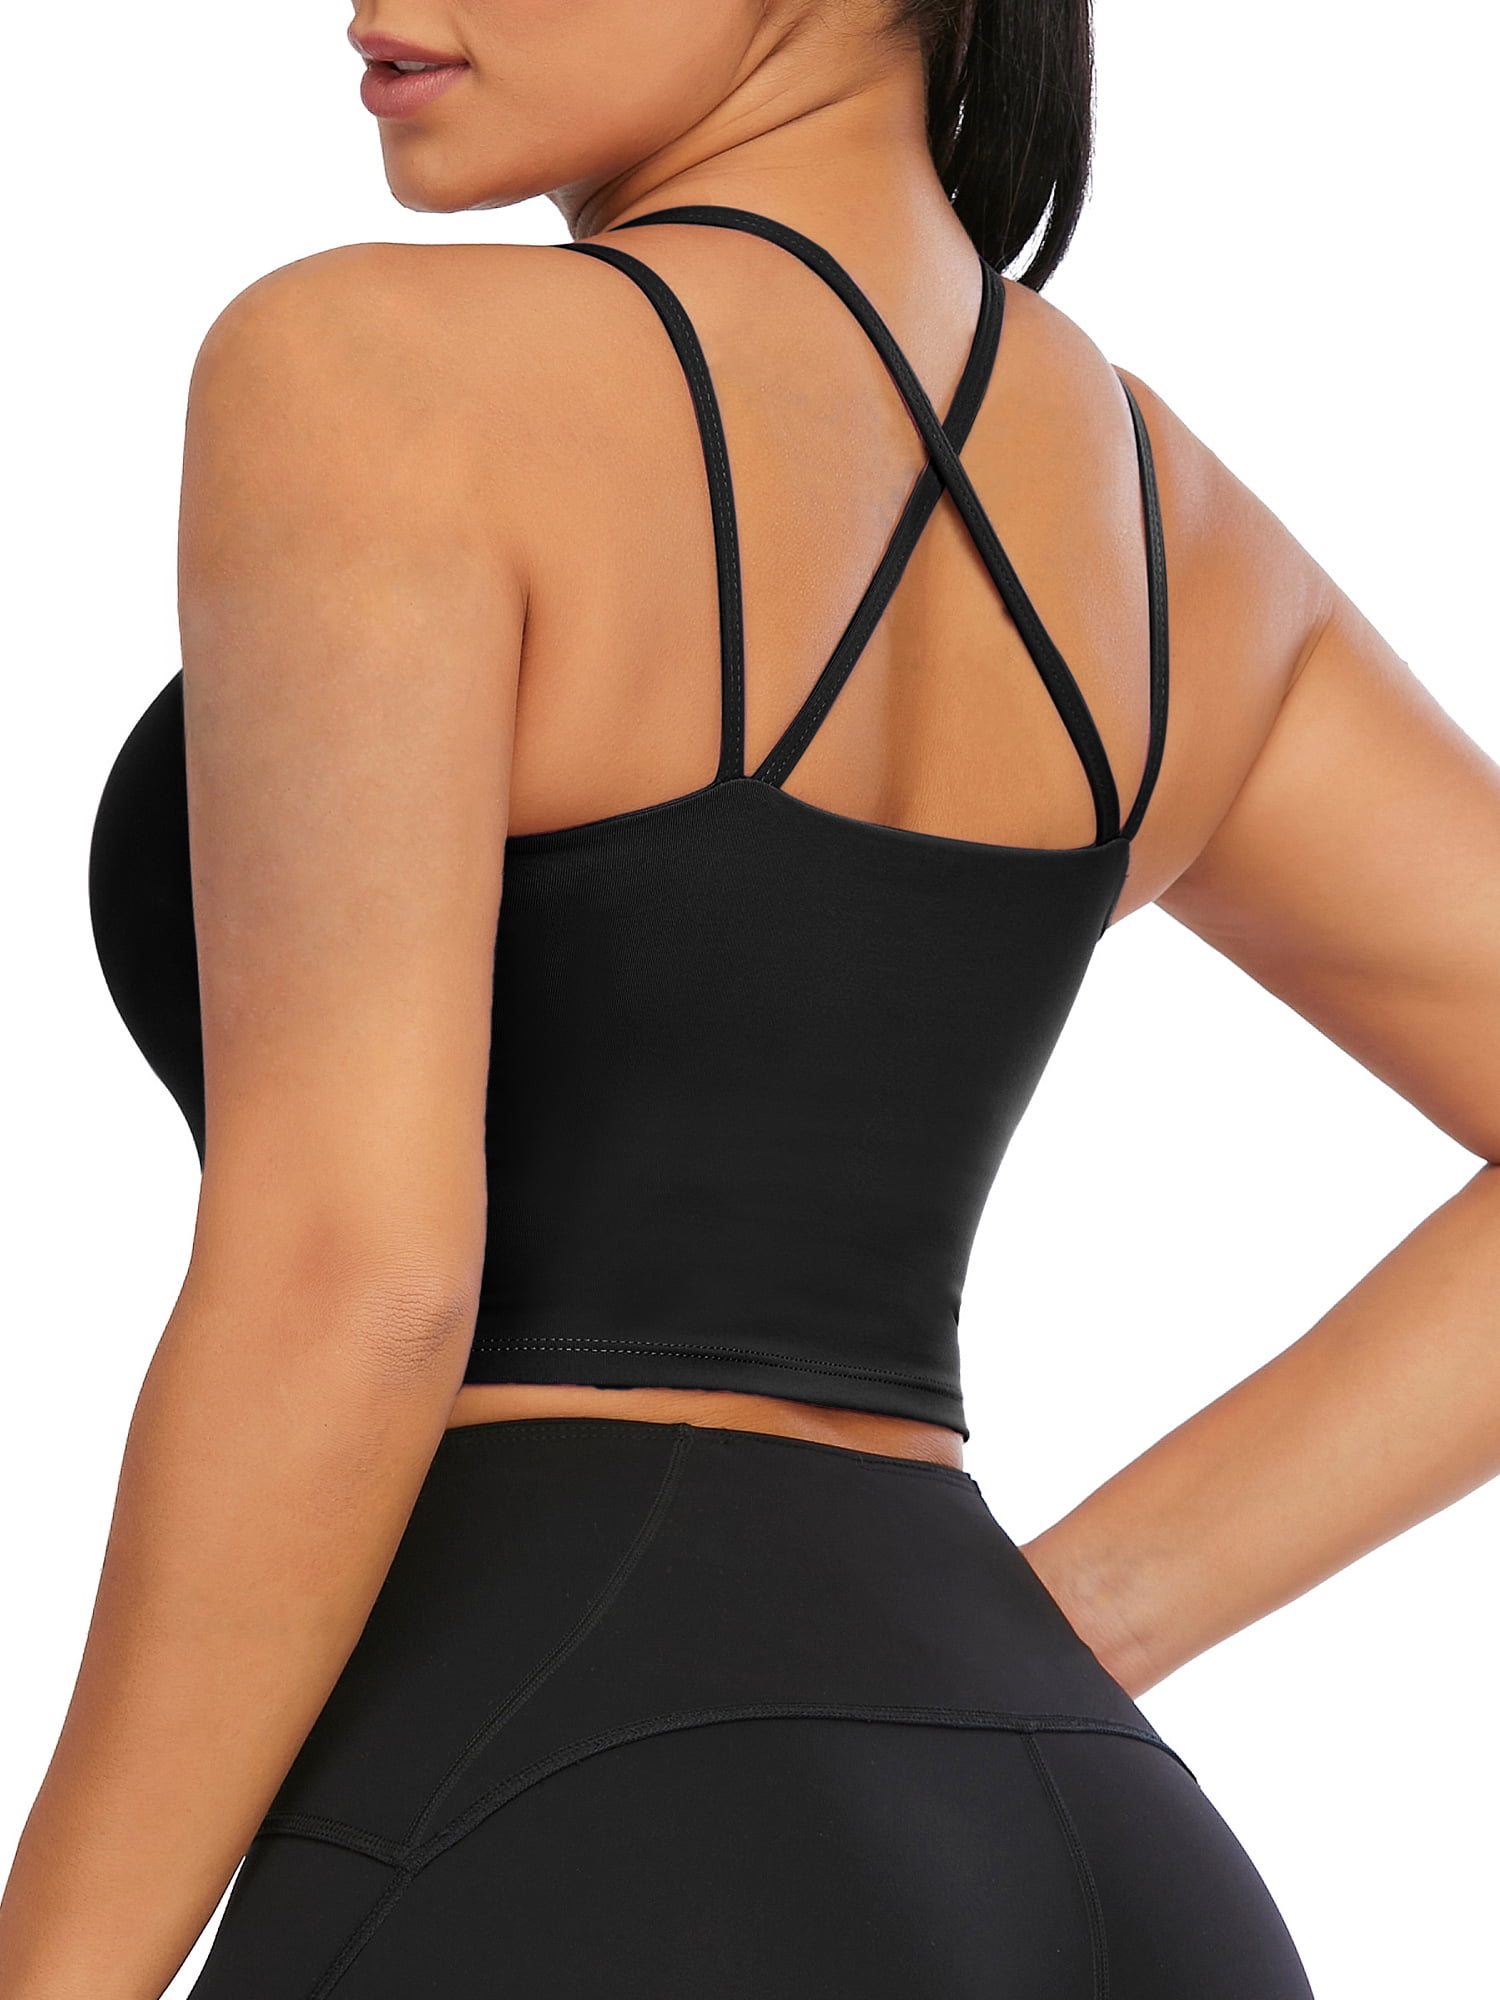 LELINTA Strappy Sports Bra for Women Sexy Crisscross for Yoga Running  Athletic Gym Workout Fitness Tank Tops 